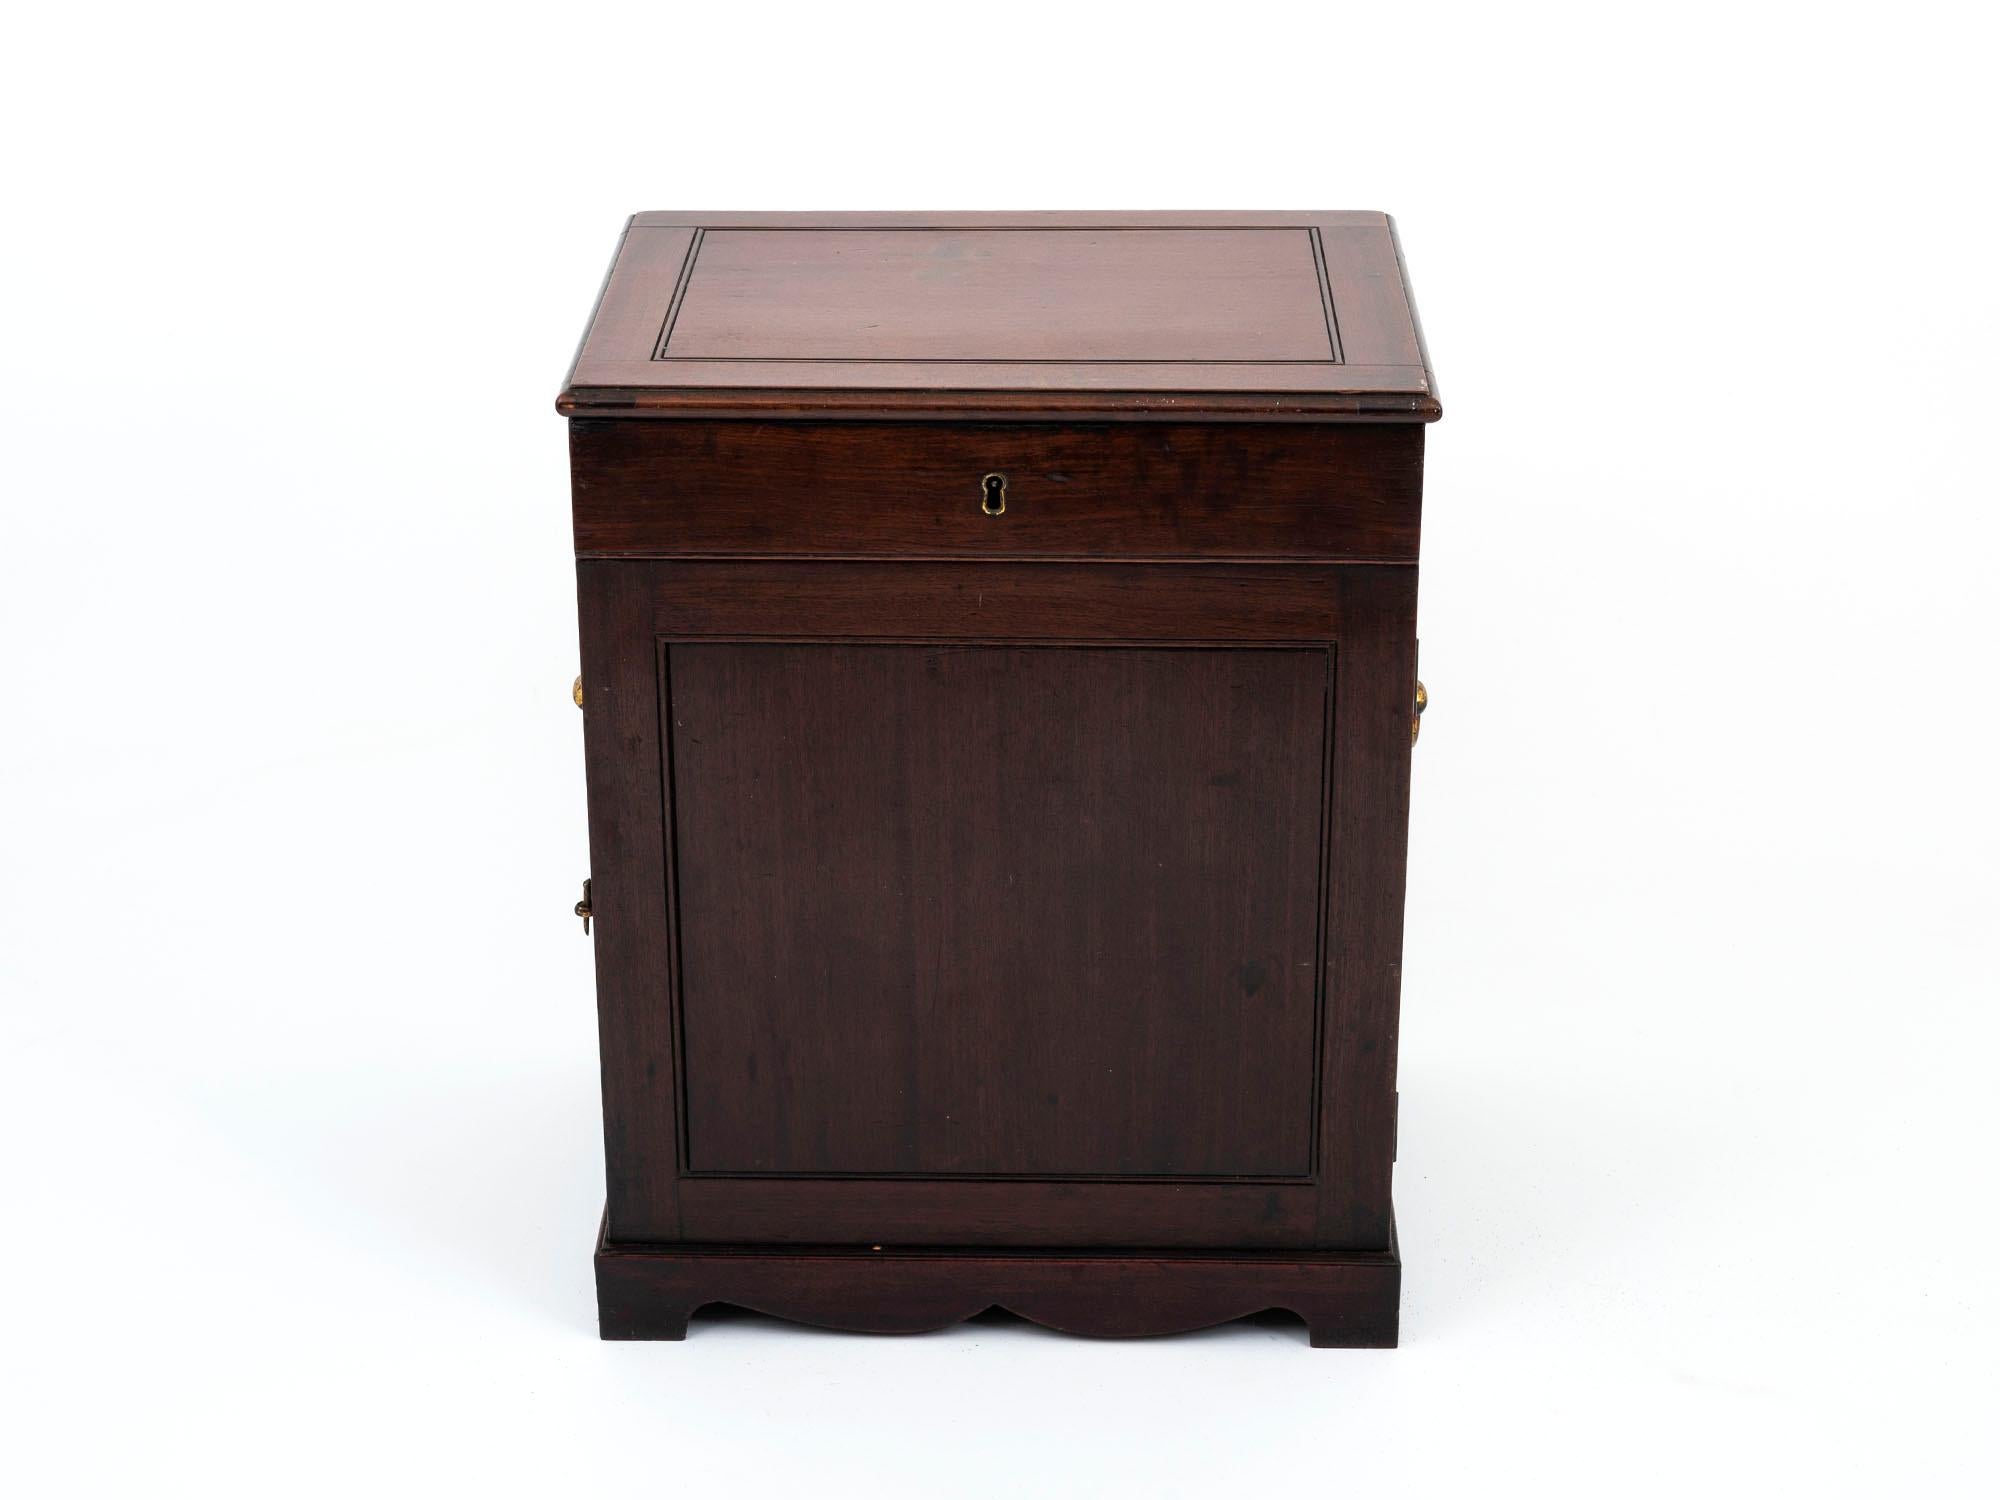 Standing on a wonderfully shaped plinth with brass handles, door latches and a key profile is this Duke of York Apothecary Cabinet in Mahogany.

When the lid is closed, the front and rear doors are secured. Lifting the lid reveals an interior